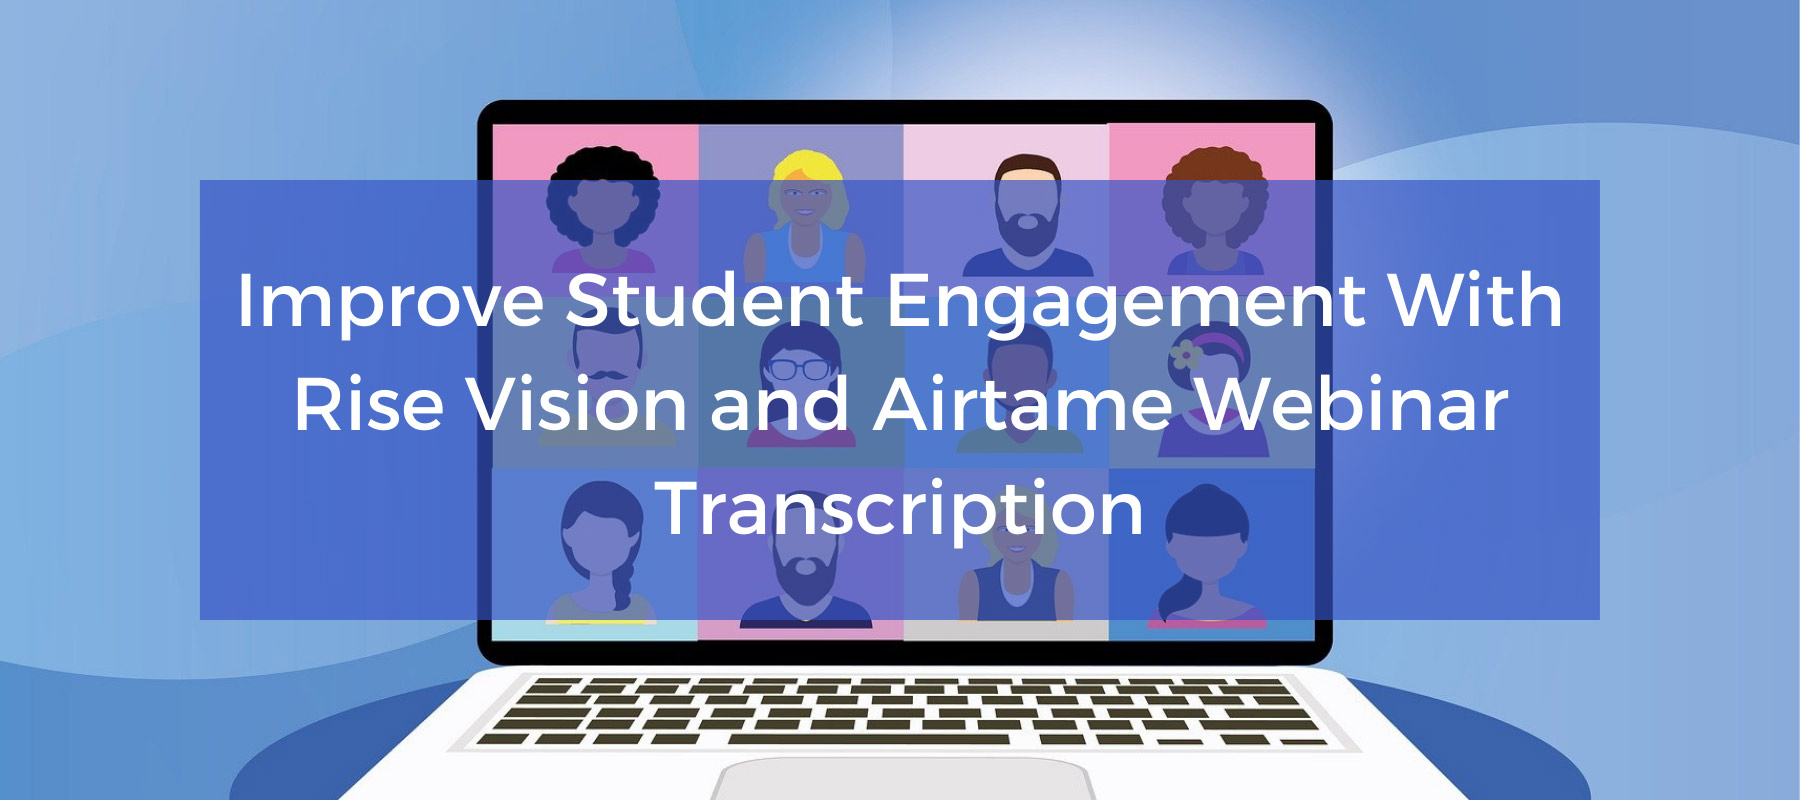 Improve Student Engagement With Rise Vision and Airtame Webinar Transcription